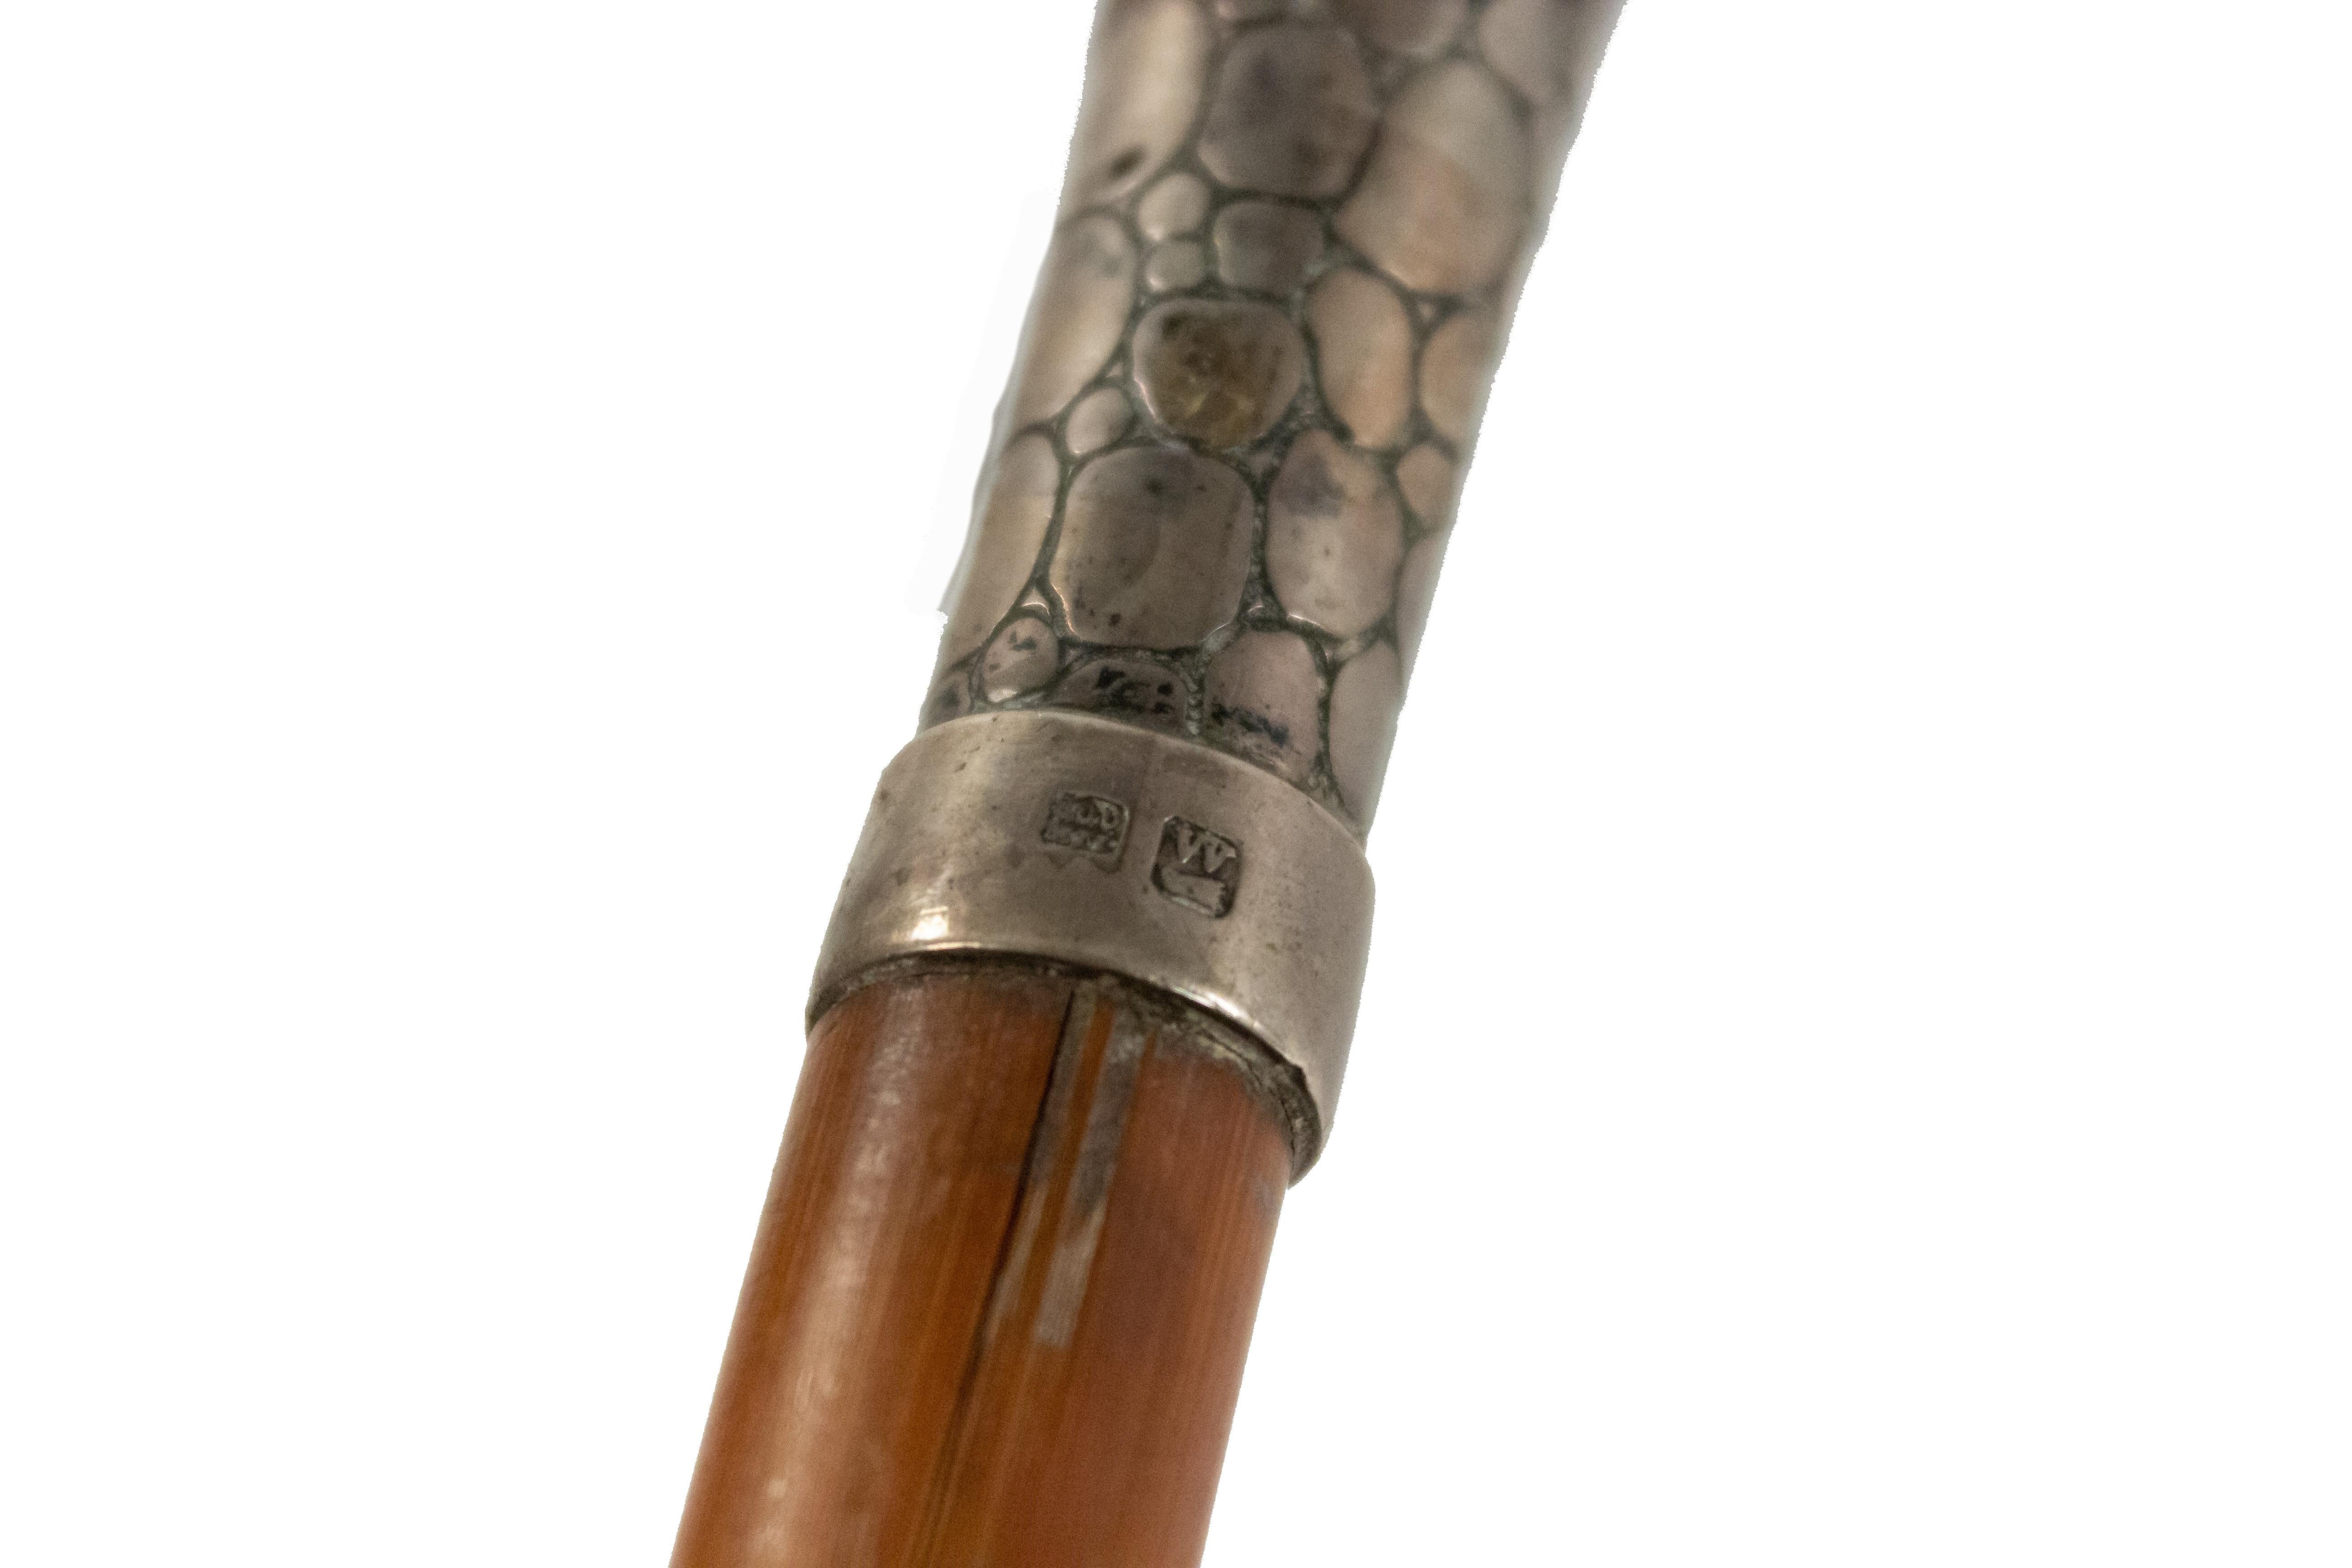 English Victorian-style simple wood cane with silver skin design handle with hallmarks at base.